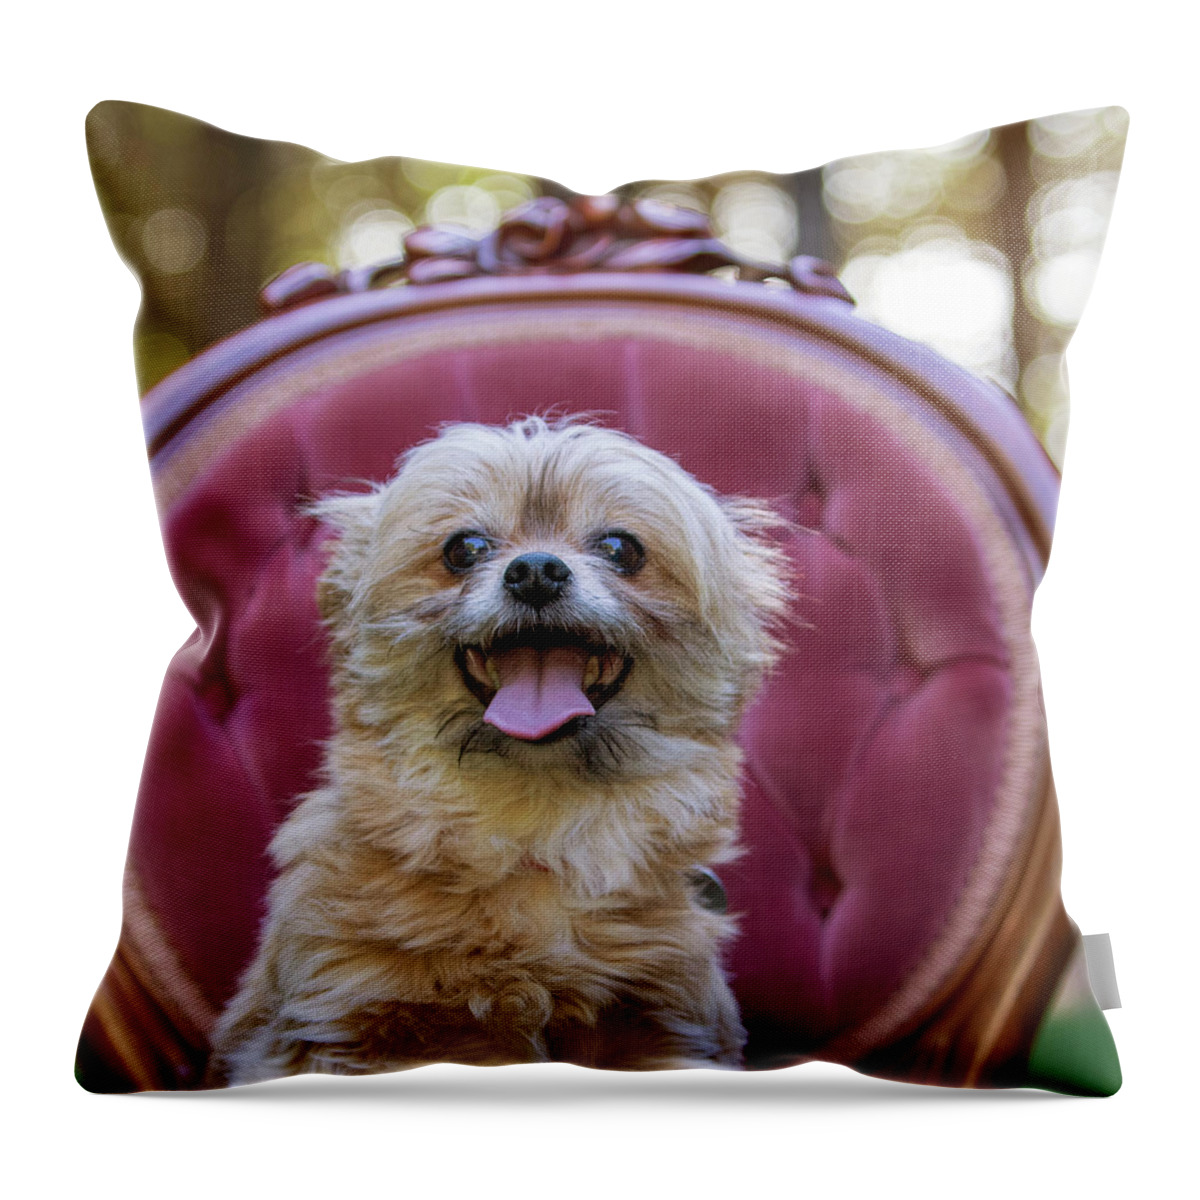  Throw Pillow featuring the photograph 3- Four Littles Square by Rebecca Cozart